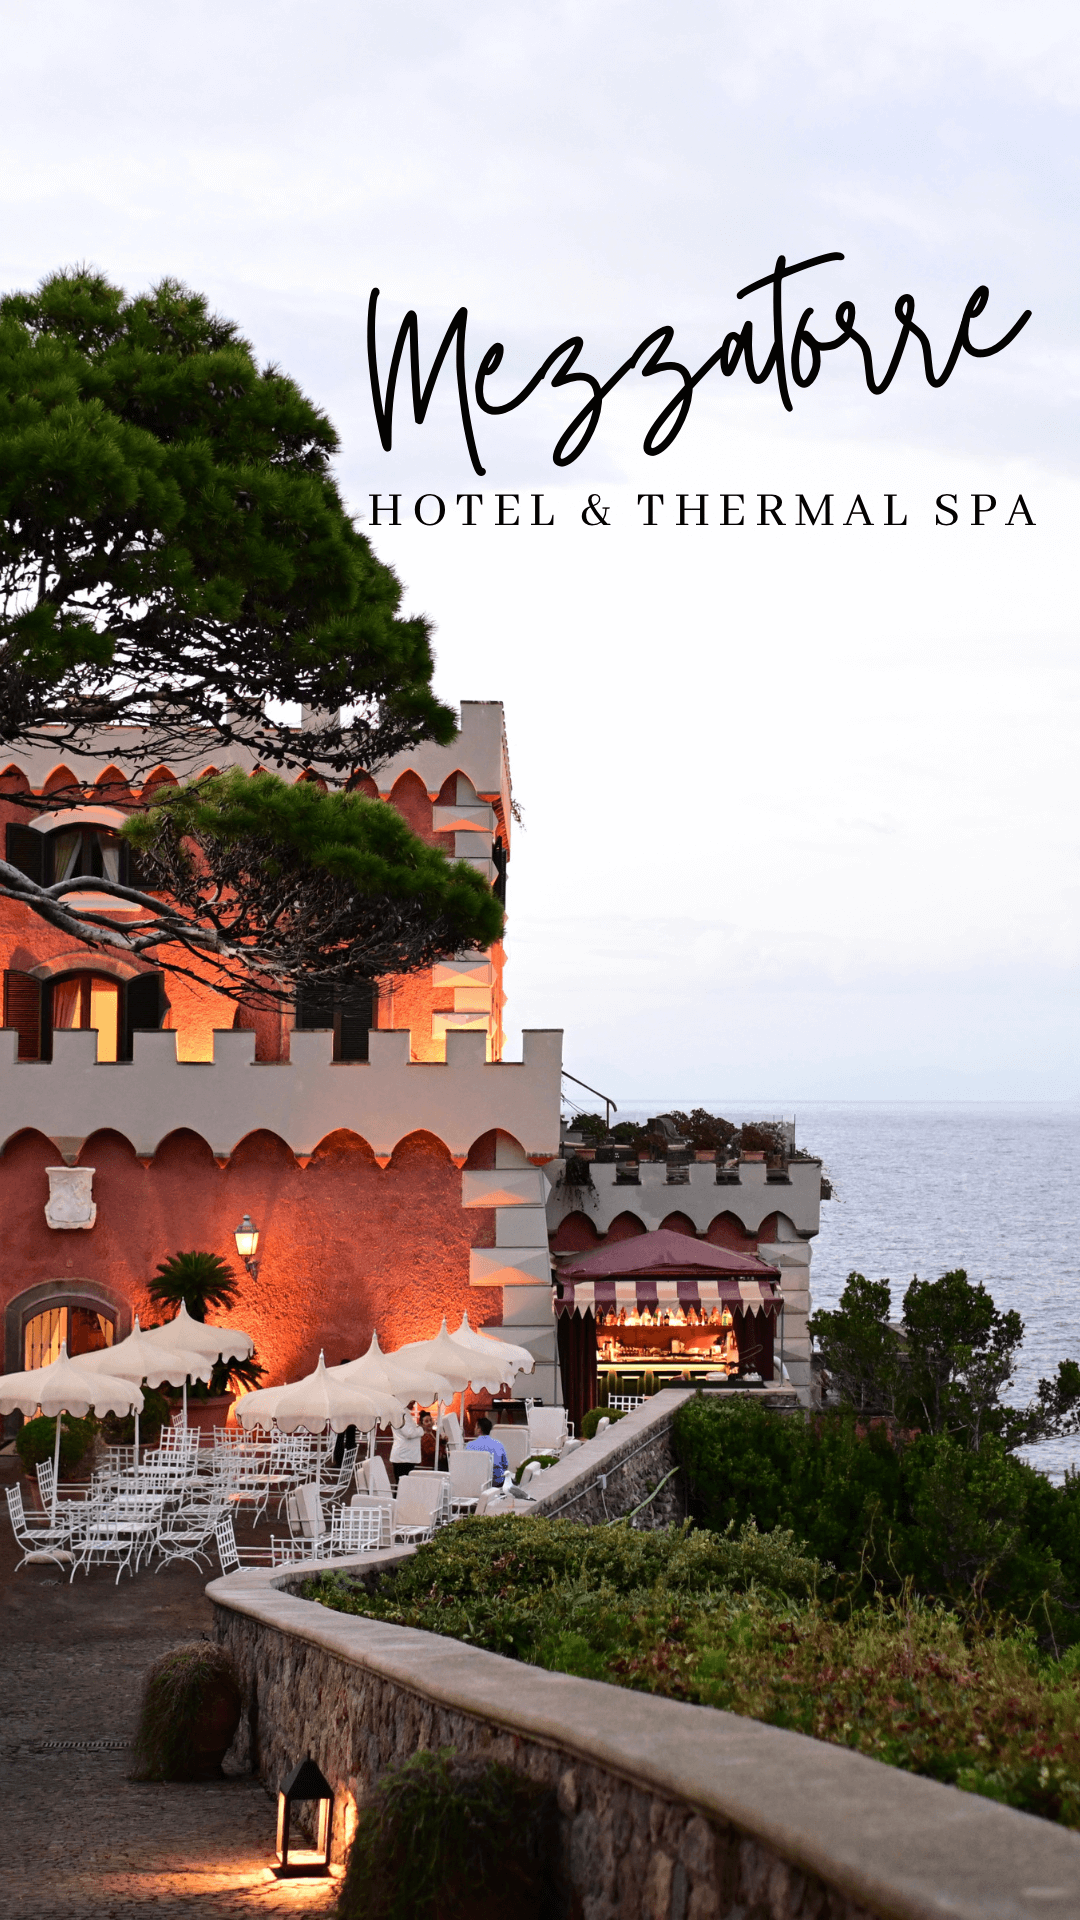 Ischia - The Insider Travel Guide
Mezzatorre Hotel & Thermal Spa